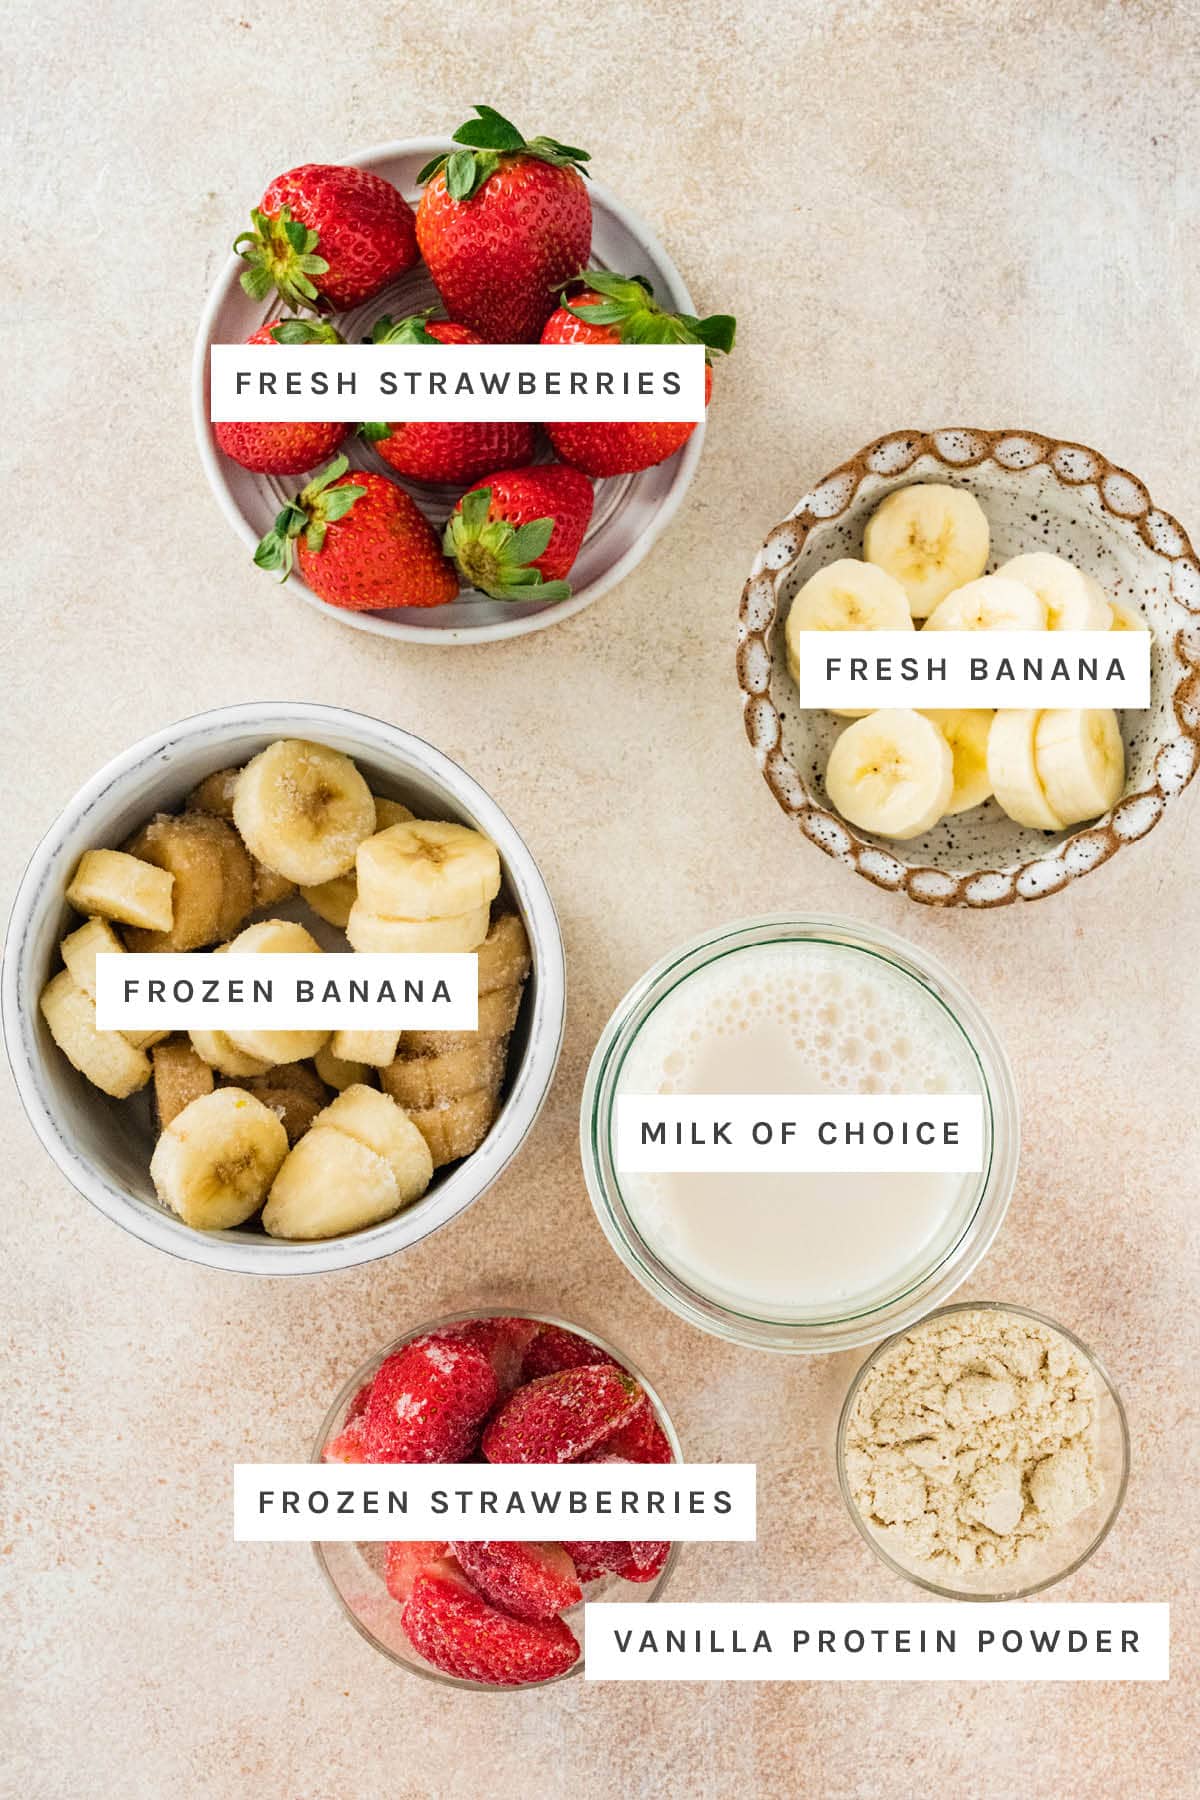 Ingredients measured out to make a Strawberry Banana Protein Smoothie: fresh and frozen strawberries, fresh and frozen banana, milk and vanilla protein powder.